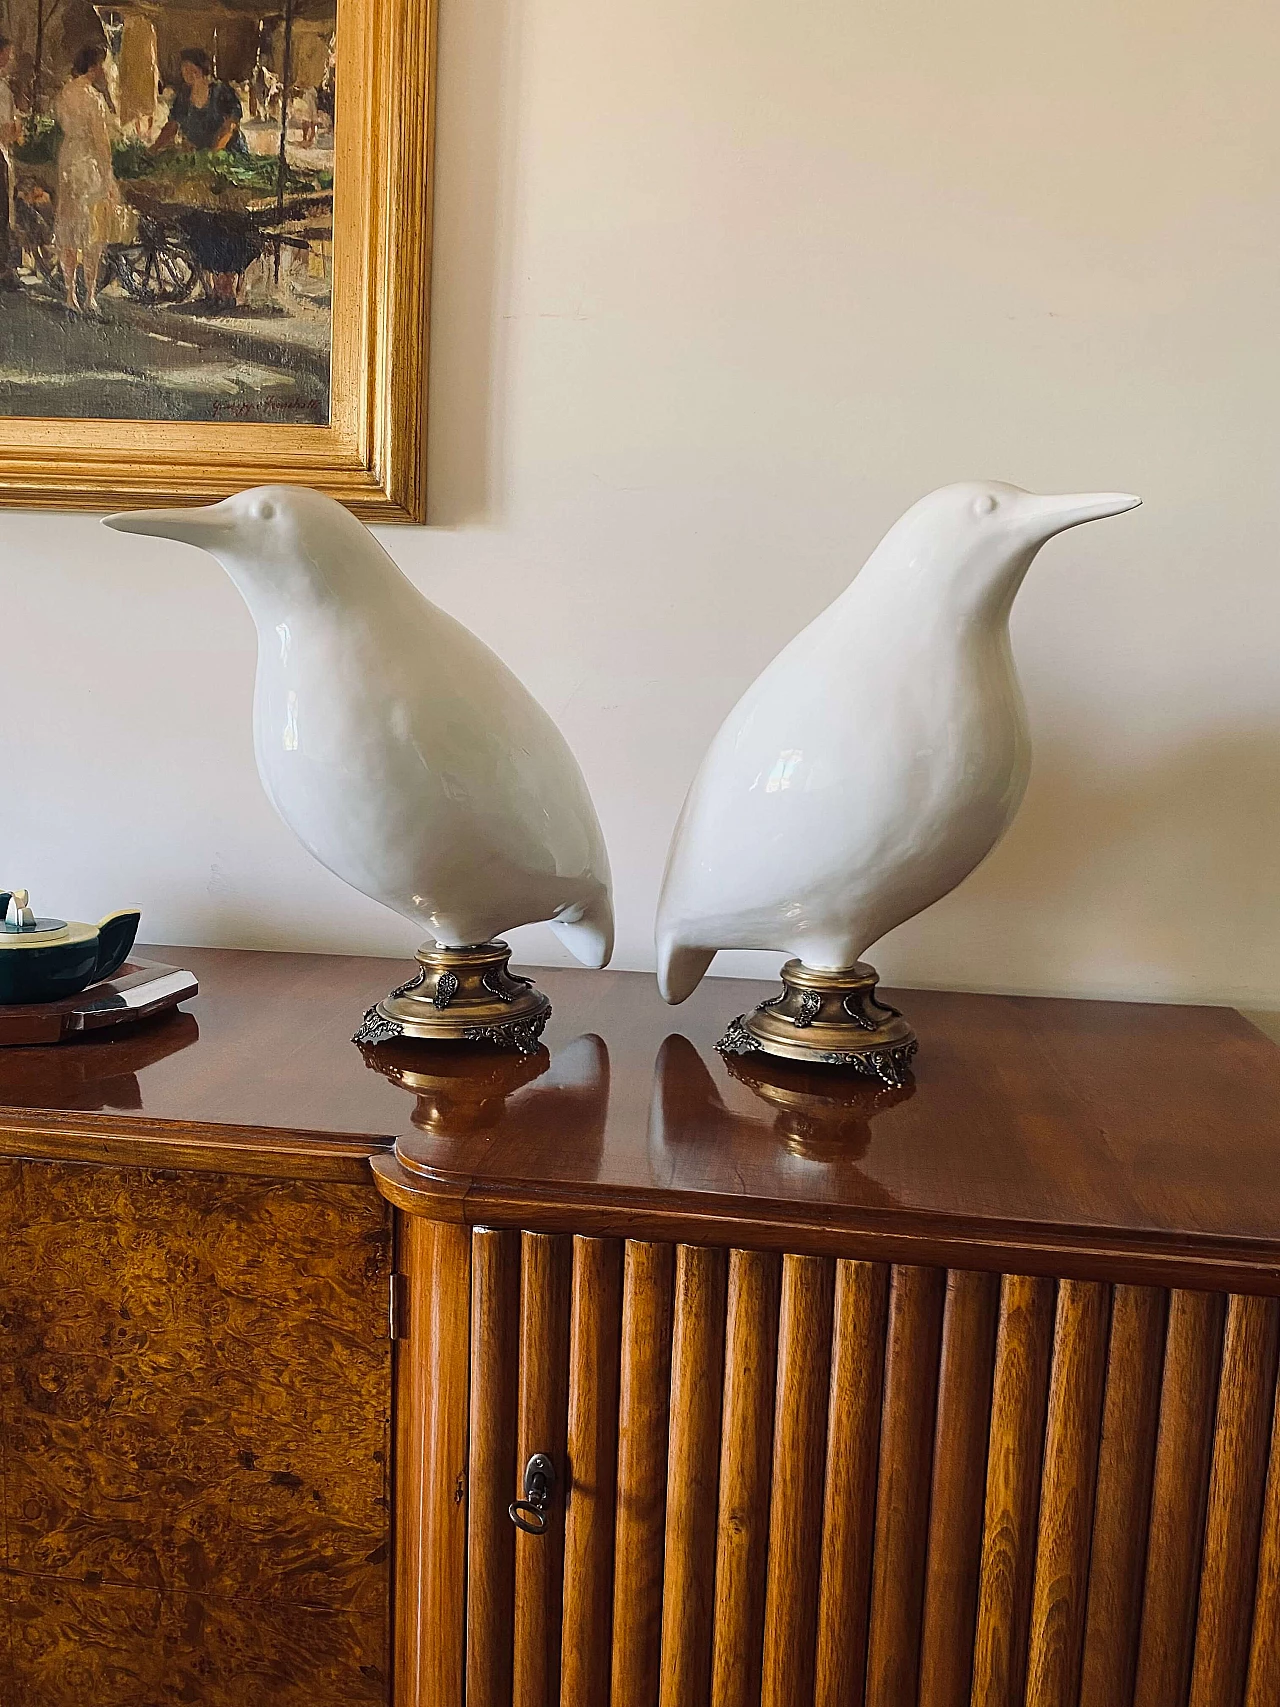 Pair of large ceramic and brass bird sculptures, early 20th century 1330612